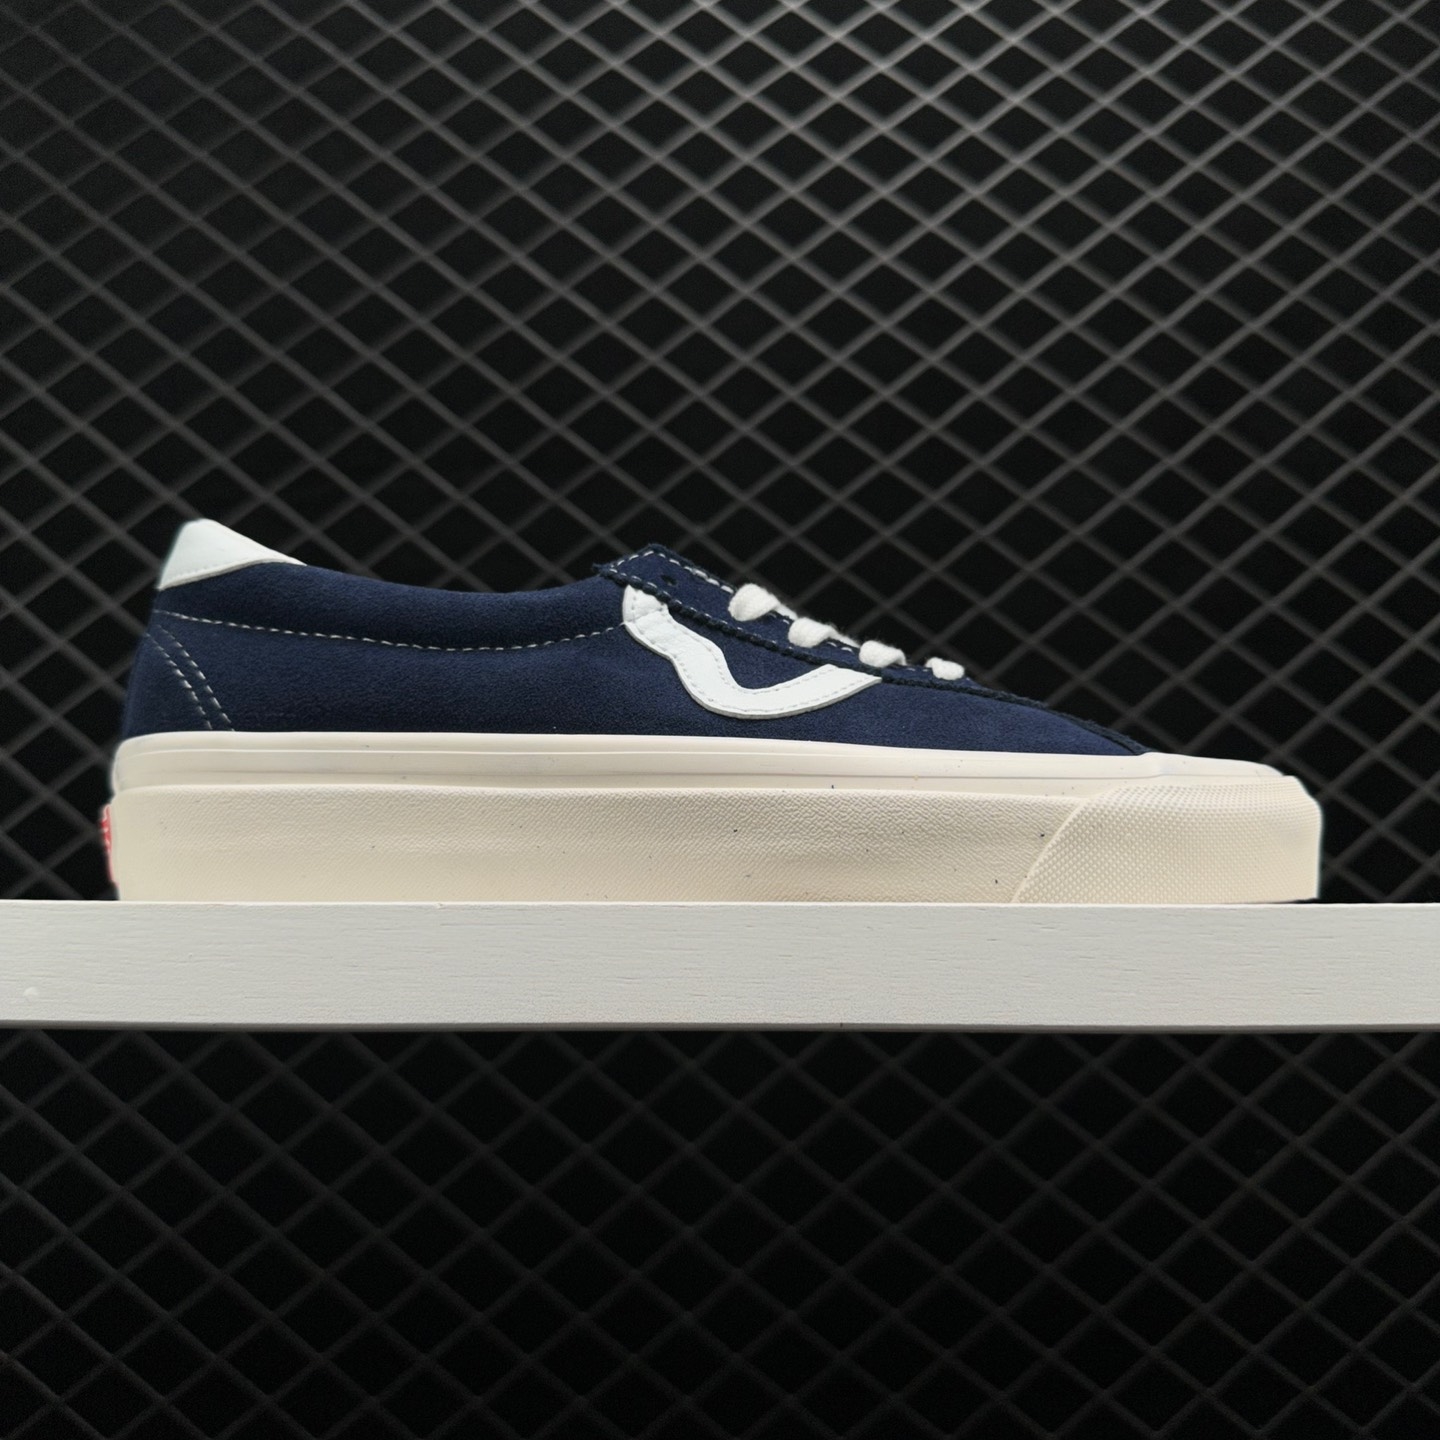 Vans Style 73 DX Anaheim Factory Navy Shoes - Get the Classic Look